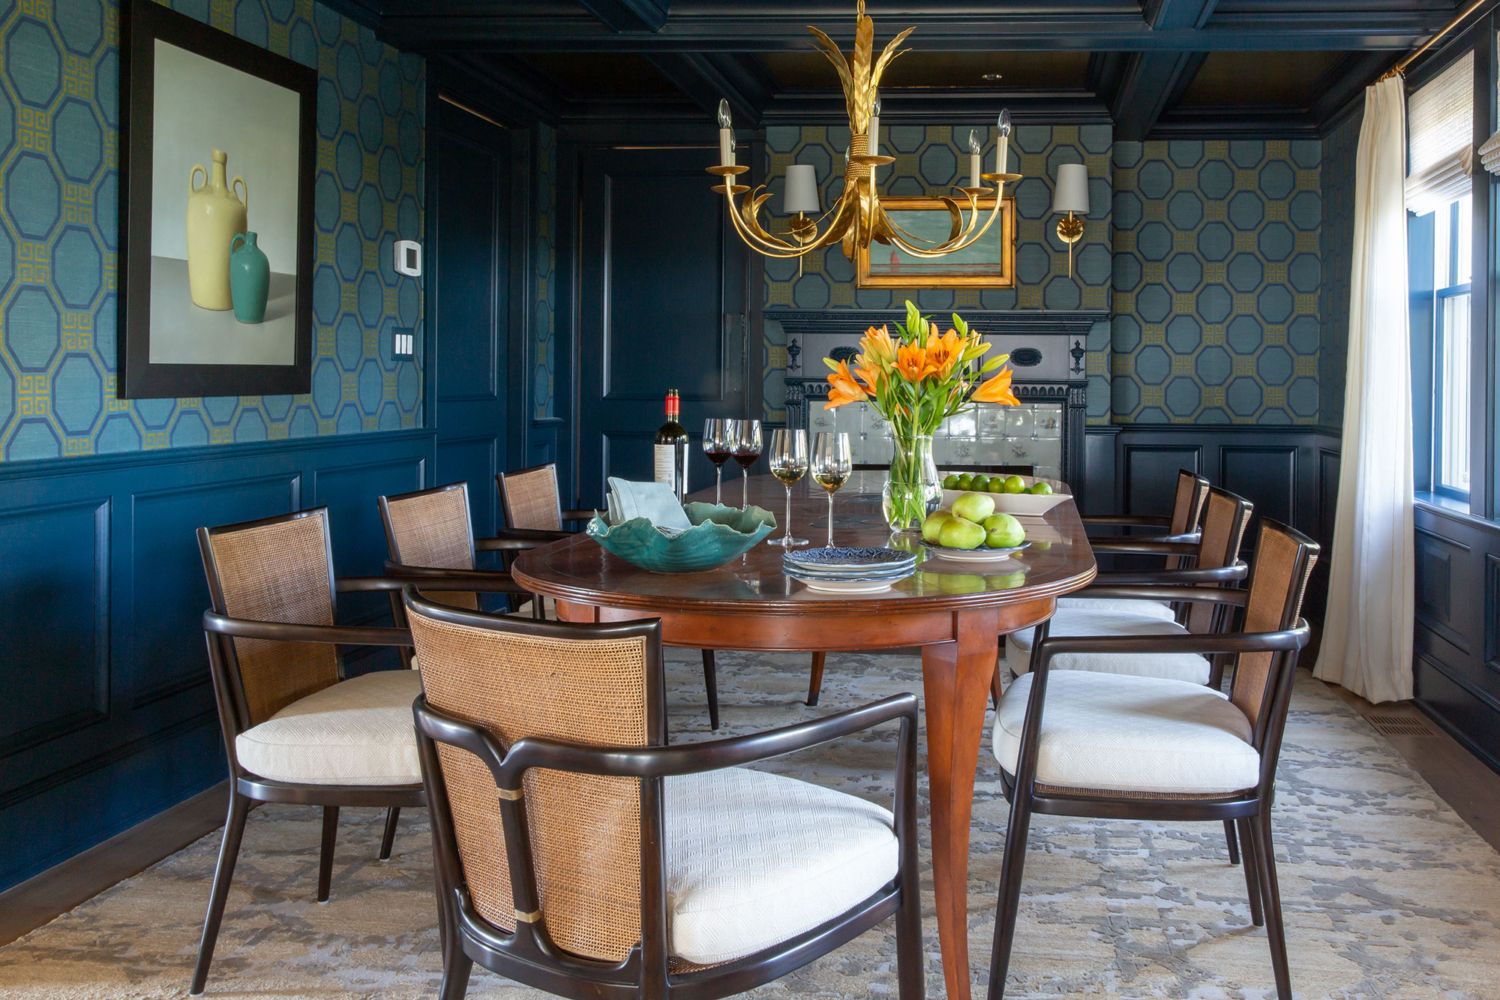 Nantucket Interior Design By Carolyn Thayer Interiors With A